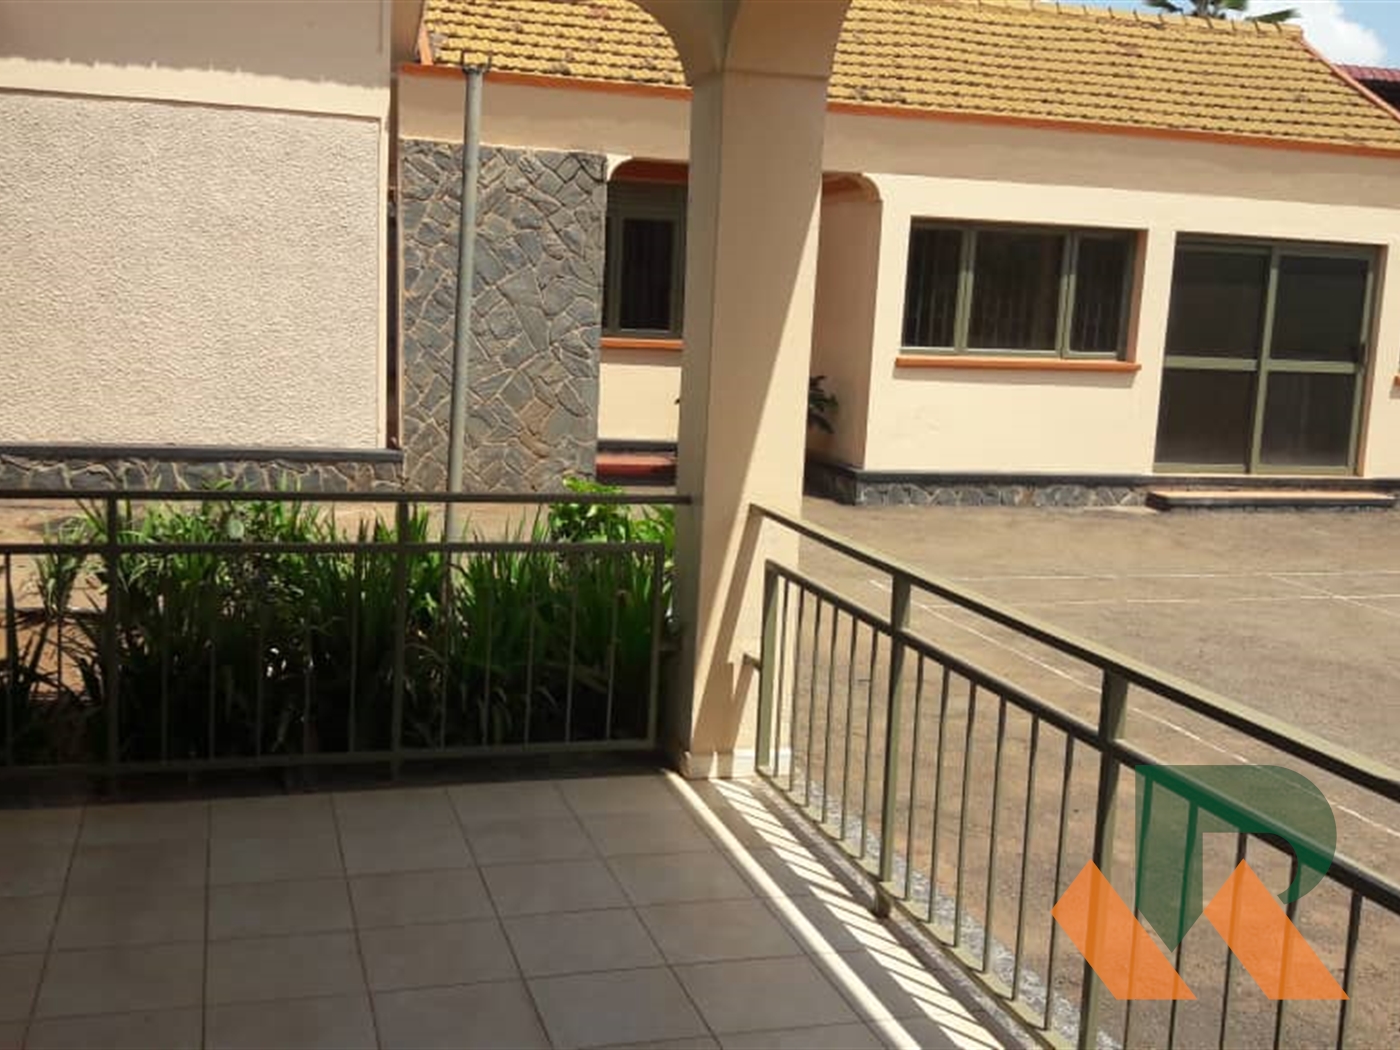 Storeyed house for rent in Bukoto Kampala